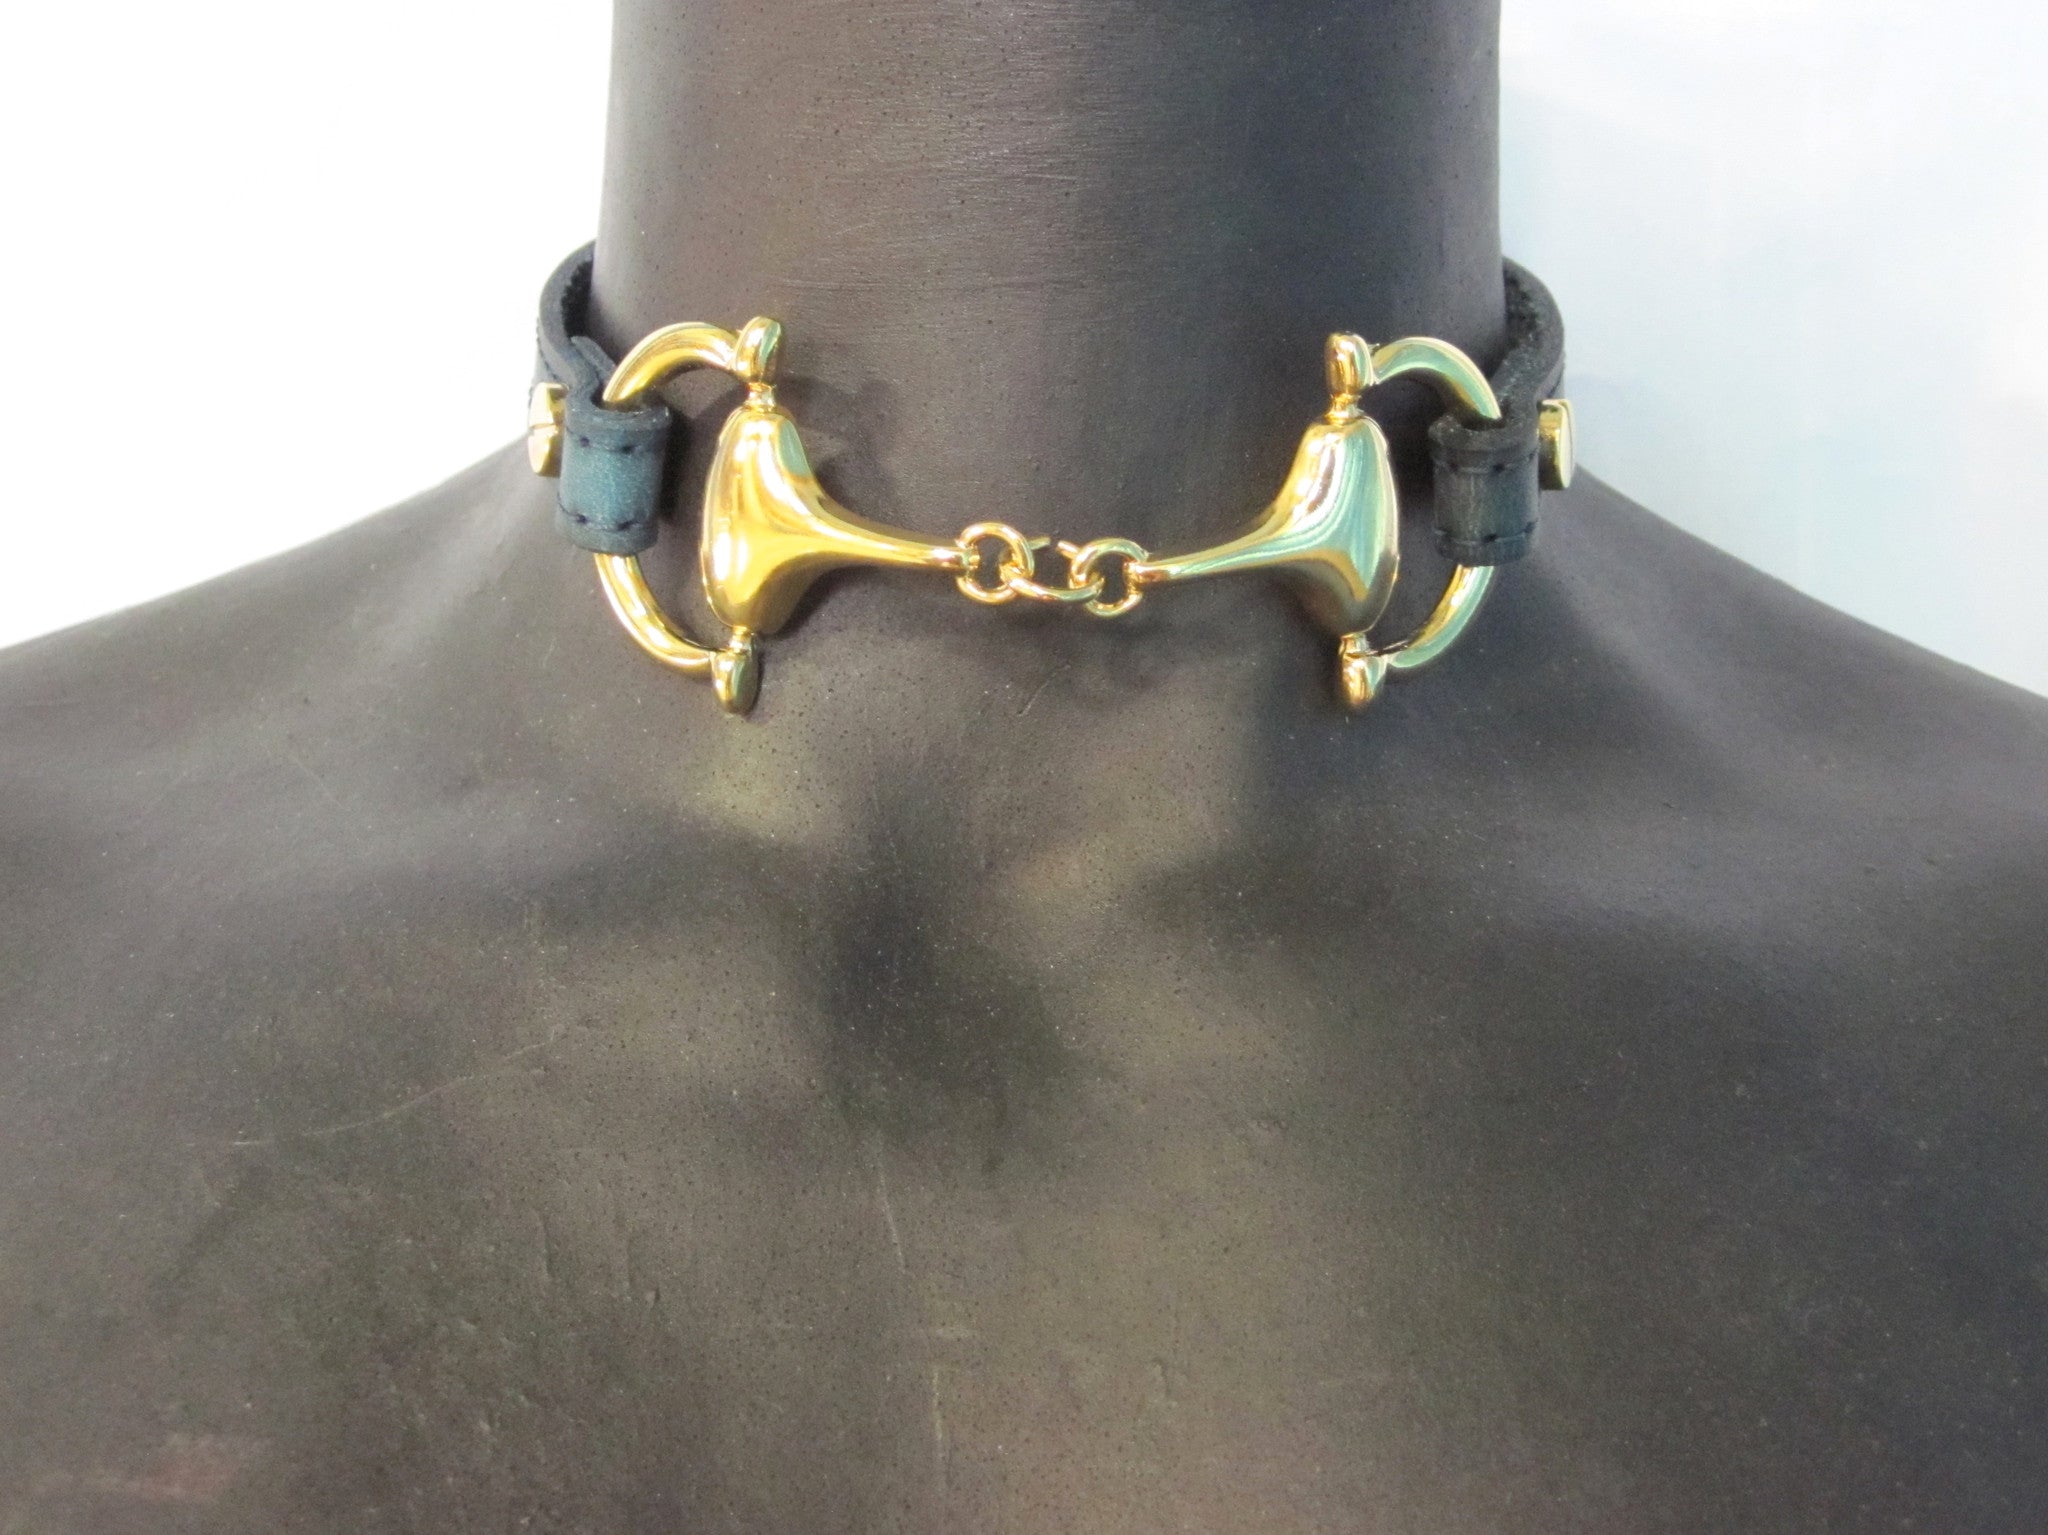 LEATHER CHOKER NECKLACE WITH D-RING HORSE BIT PENDANT by nyet jewelry